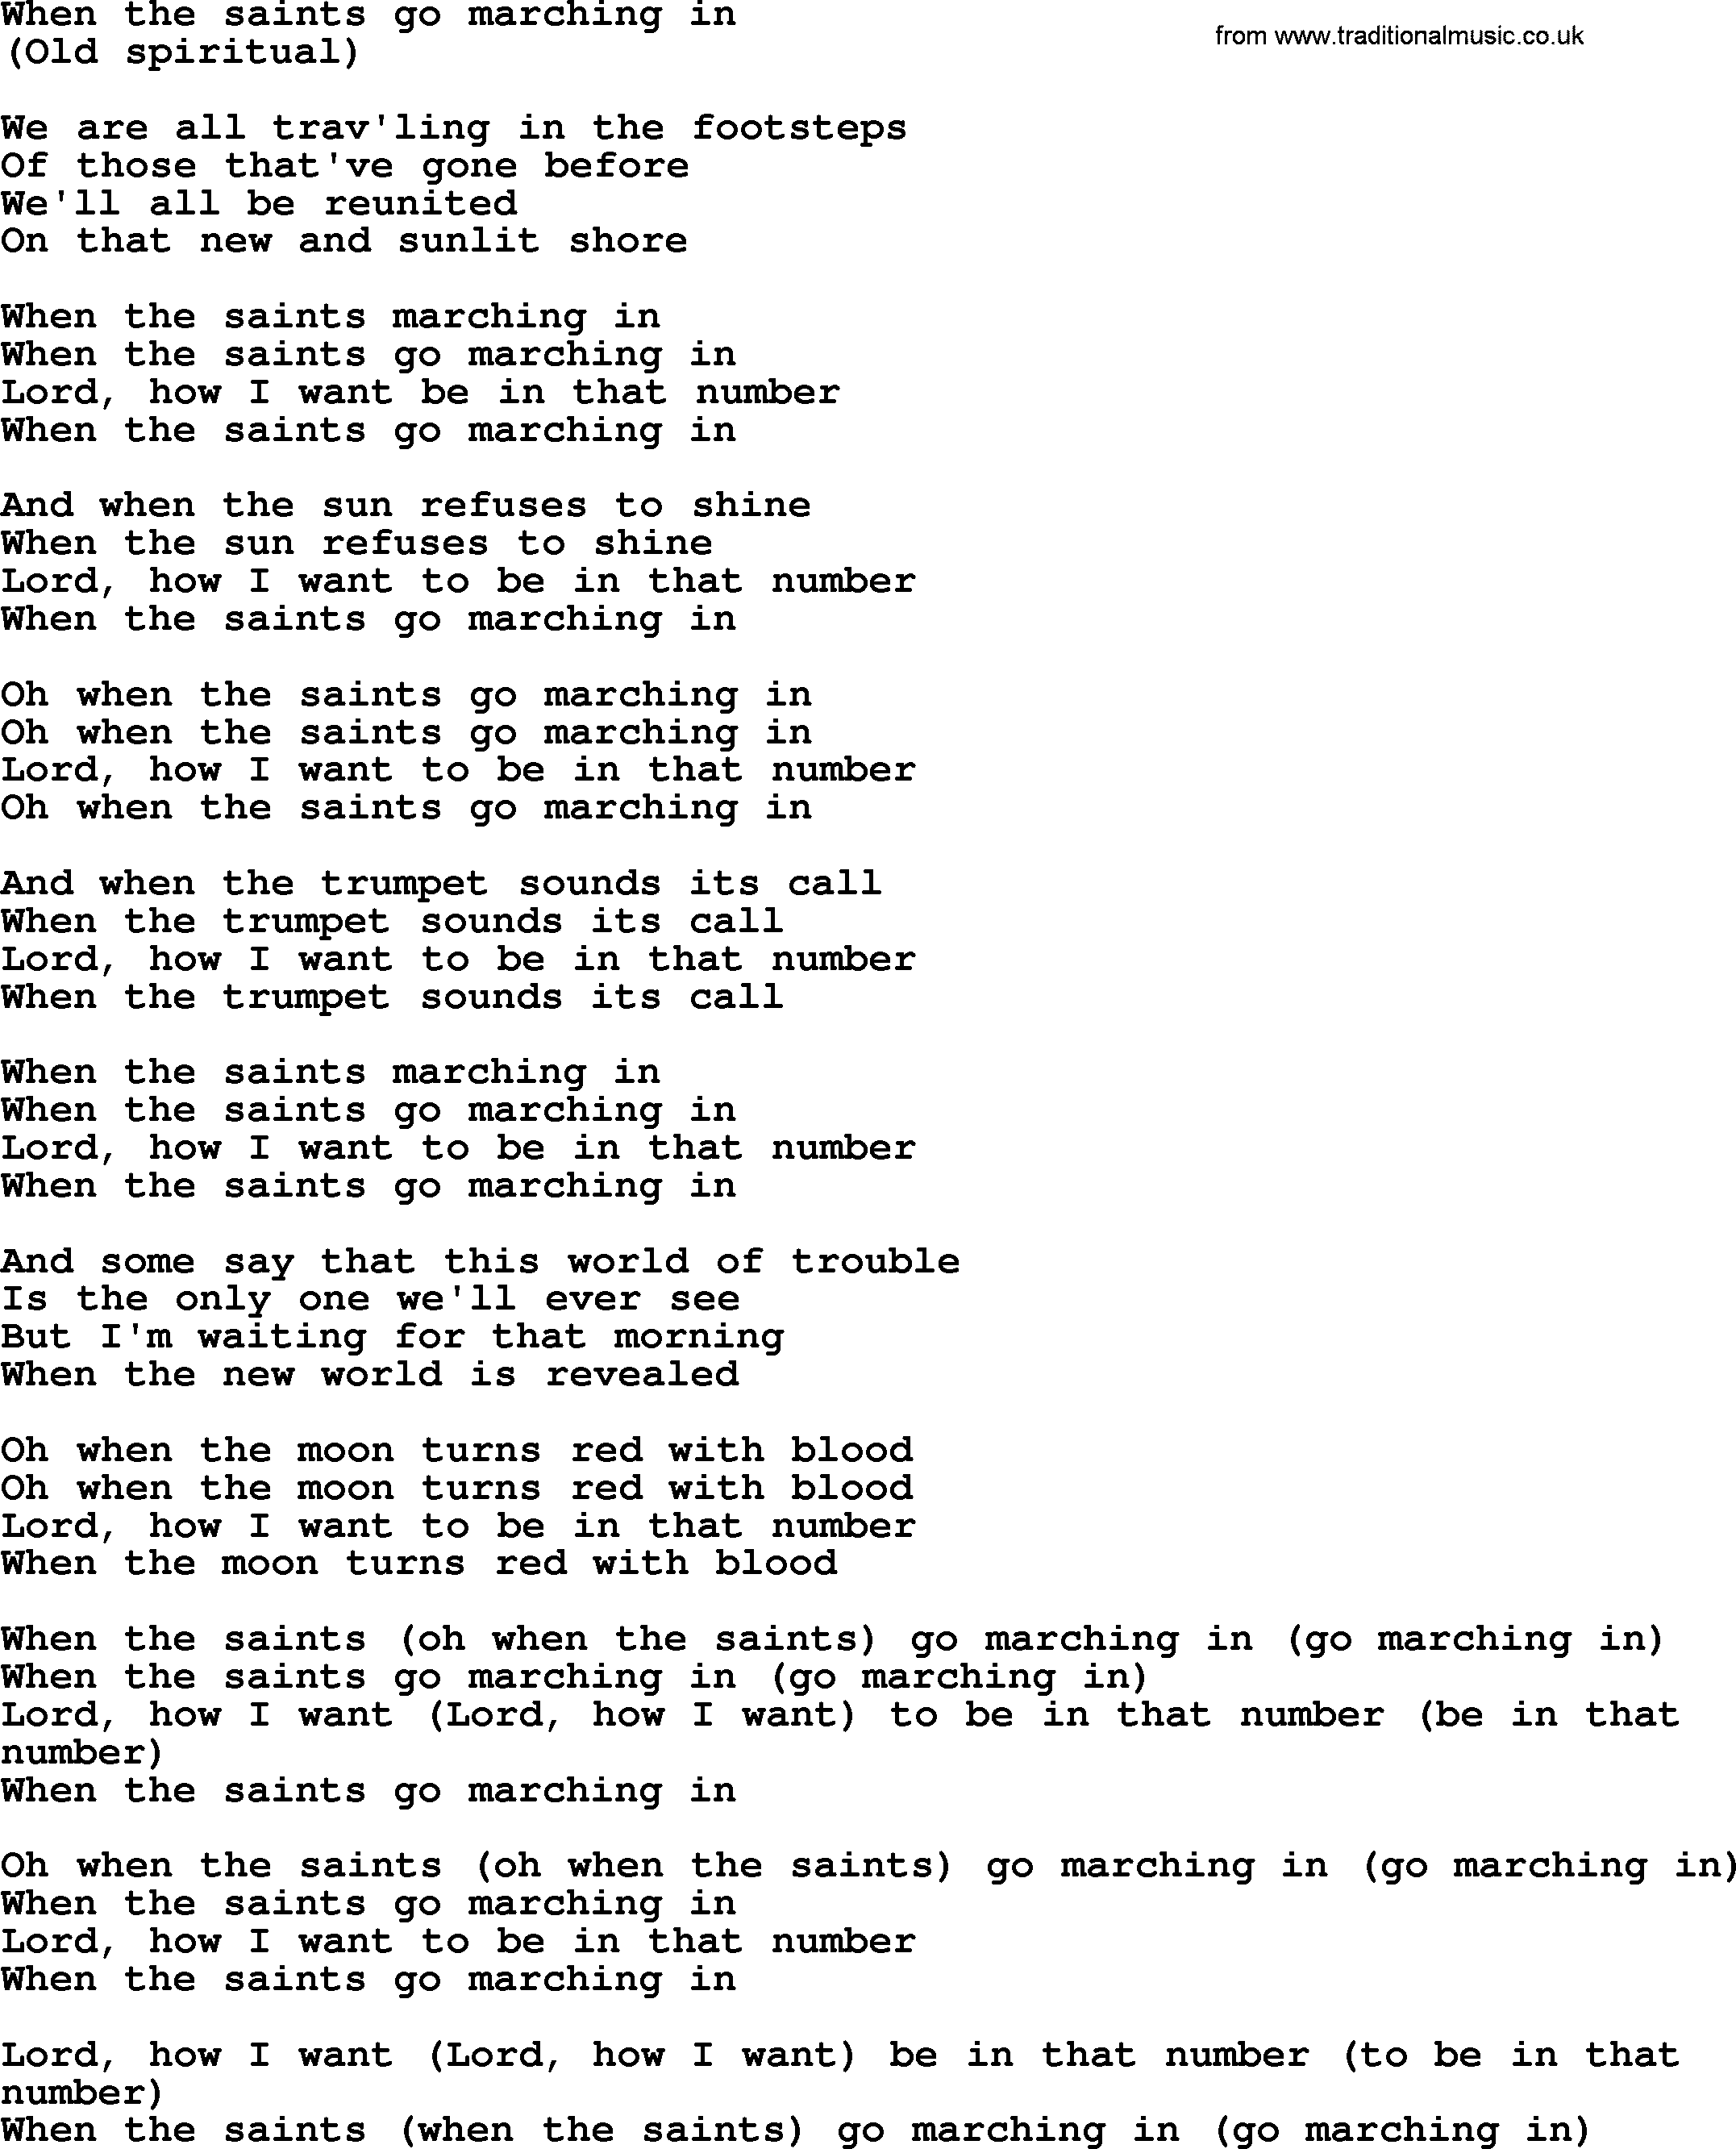 Bruce Springsteen song: When The Saints Go Marching In lyrics